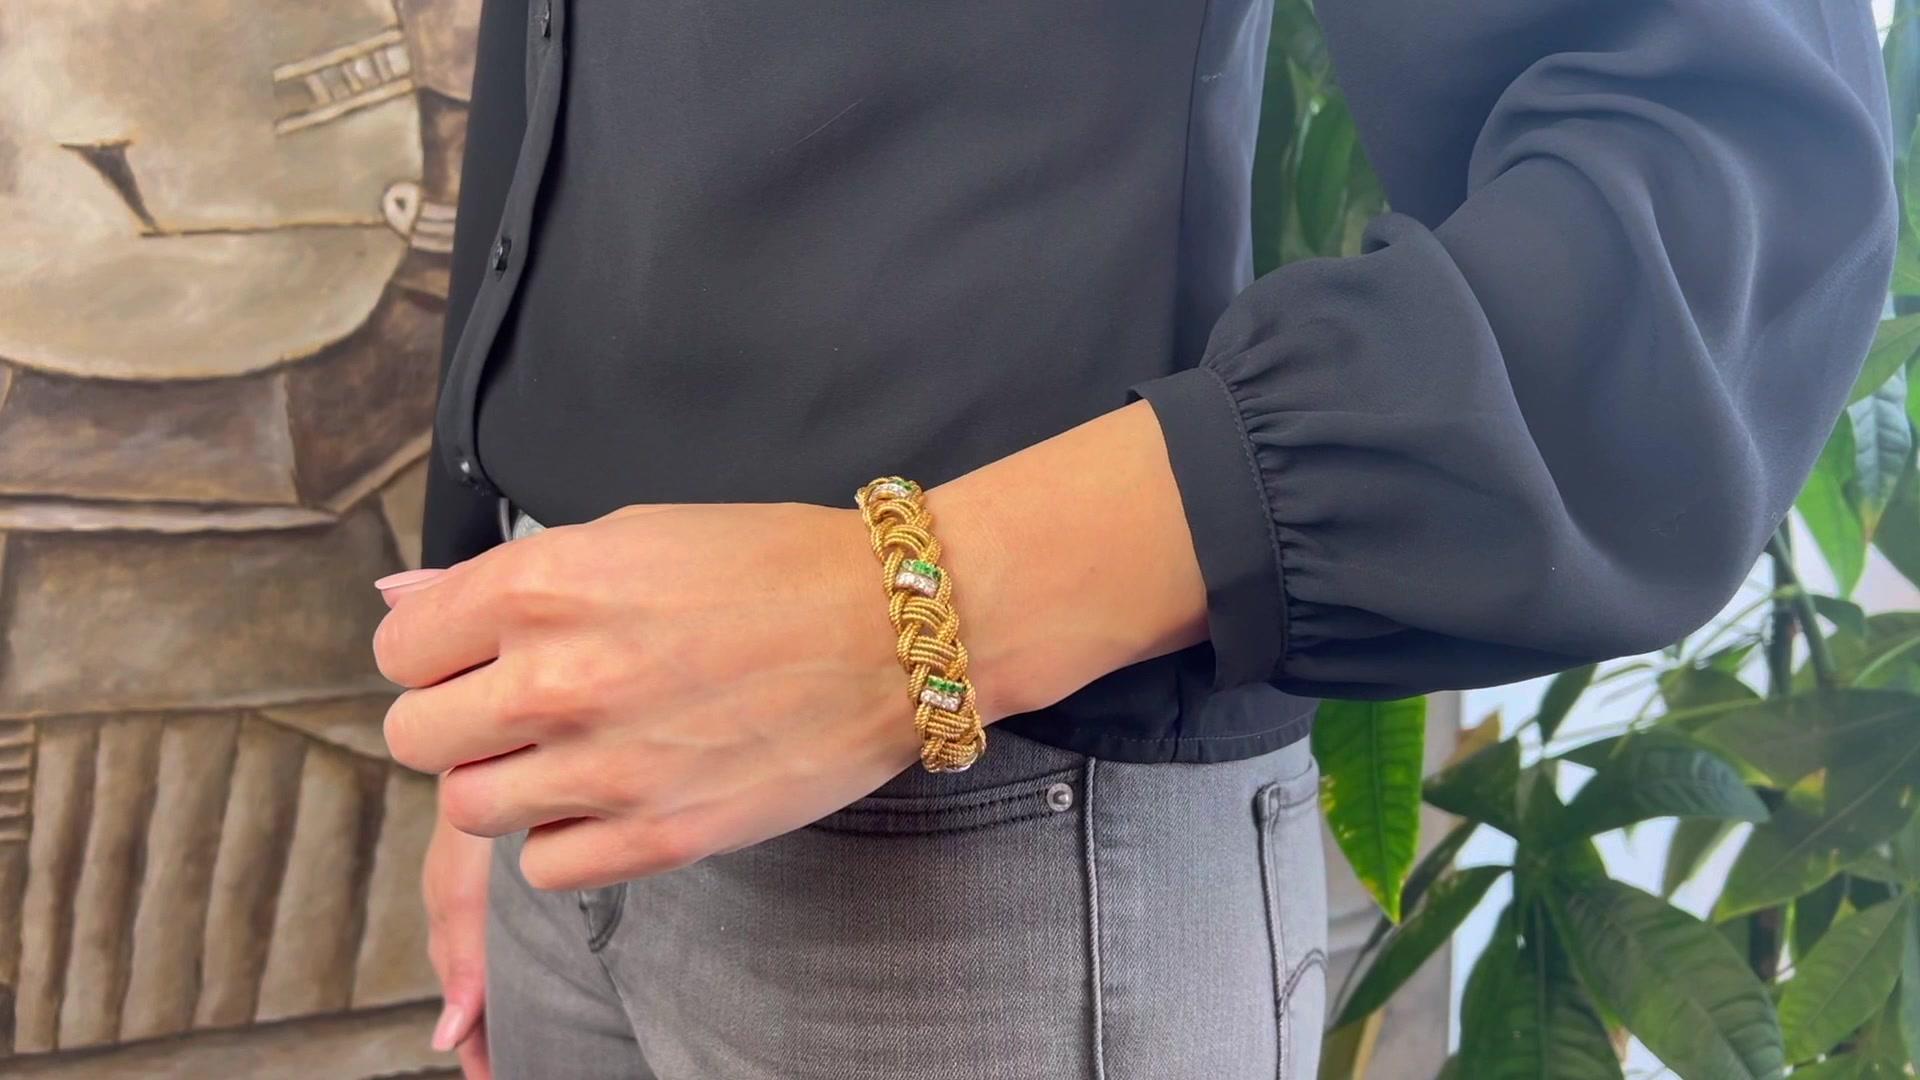 One Mid Century Van Cleef & Arpels Diamond Emerald 18k Yellow Gold Braided Rope Bracelet. Featuring 28 round brilliant cut diamonds with a total weight of approximately 1.30 carats, graded D-E color, VVS clarity. Accented by 28 round brilliant cut